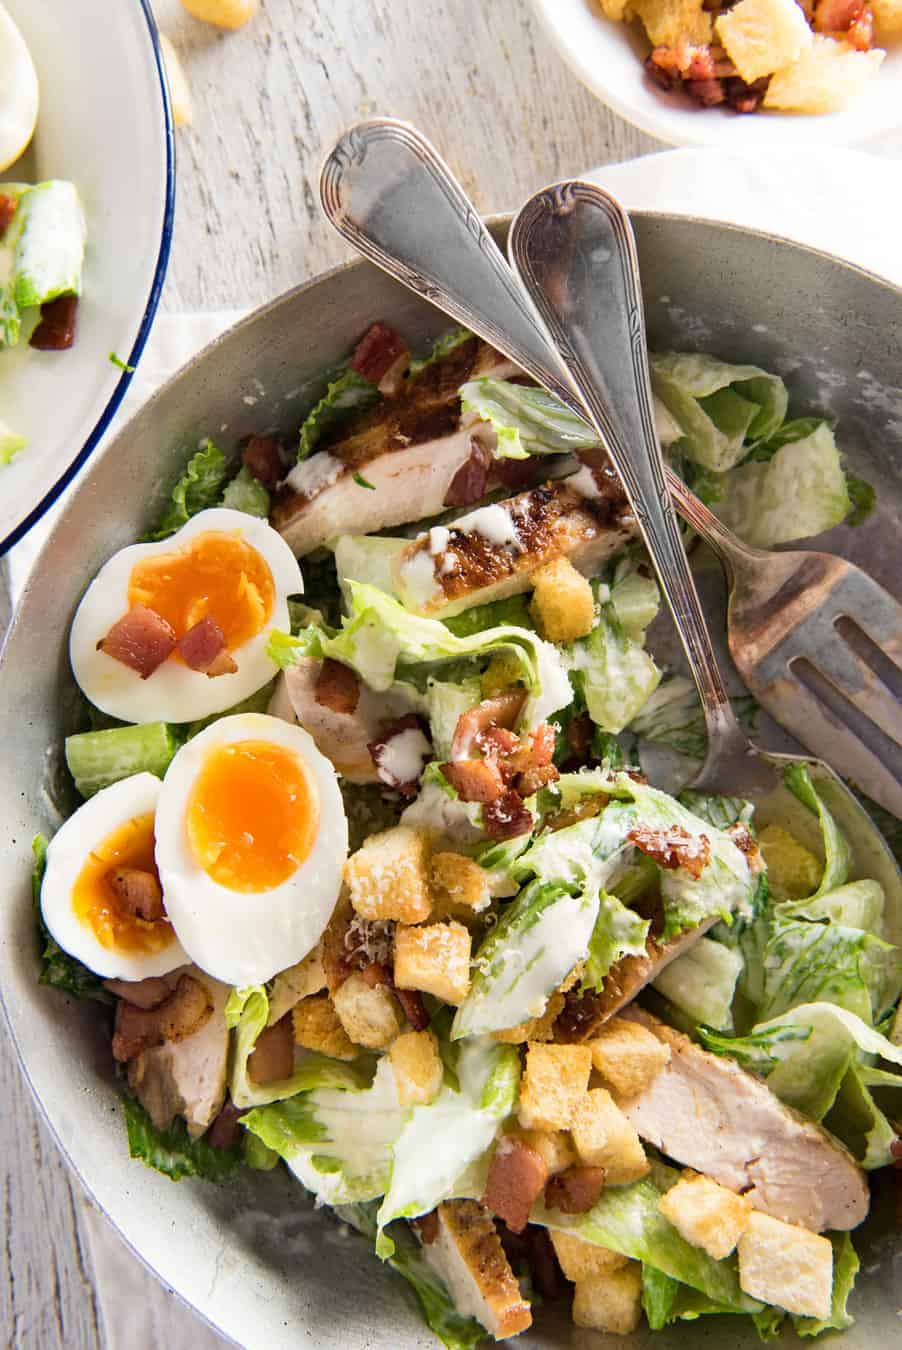 Chicken Caesar Salad - Restaurant quality salad, it's all about the homemade dressing!